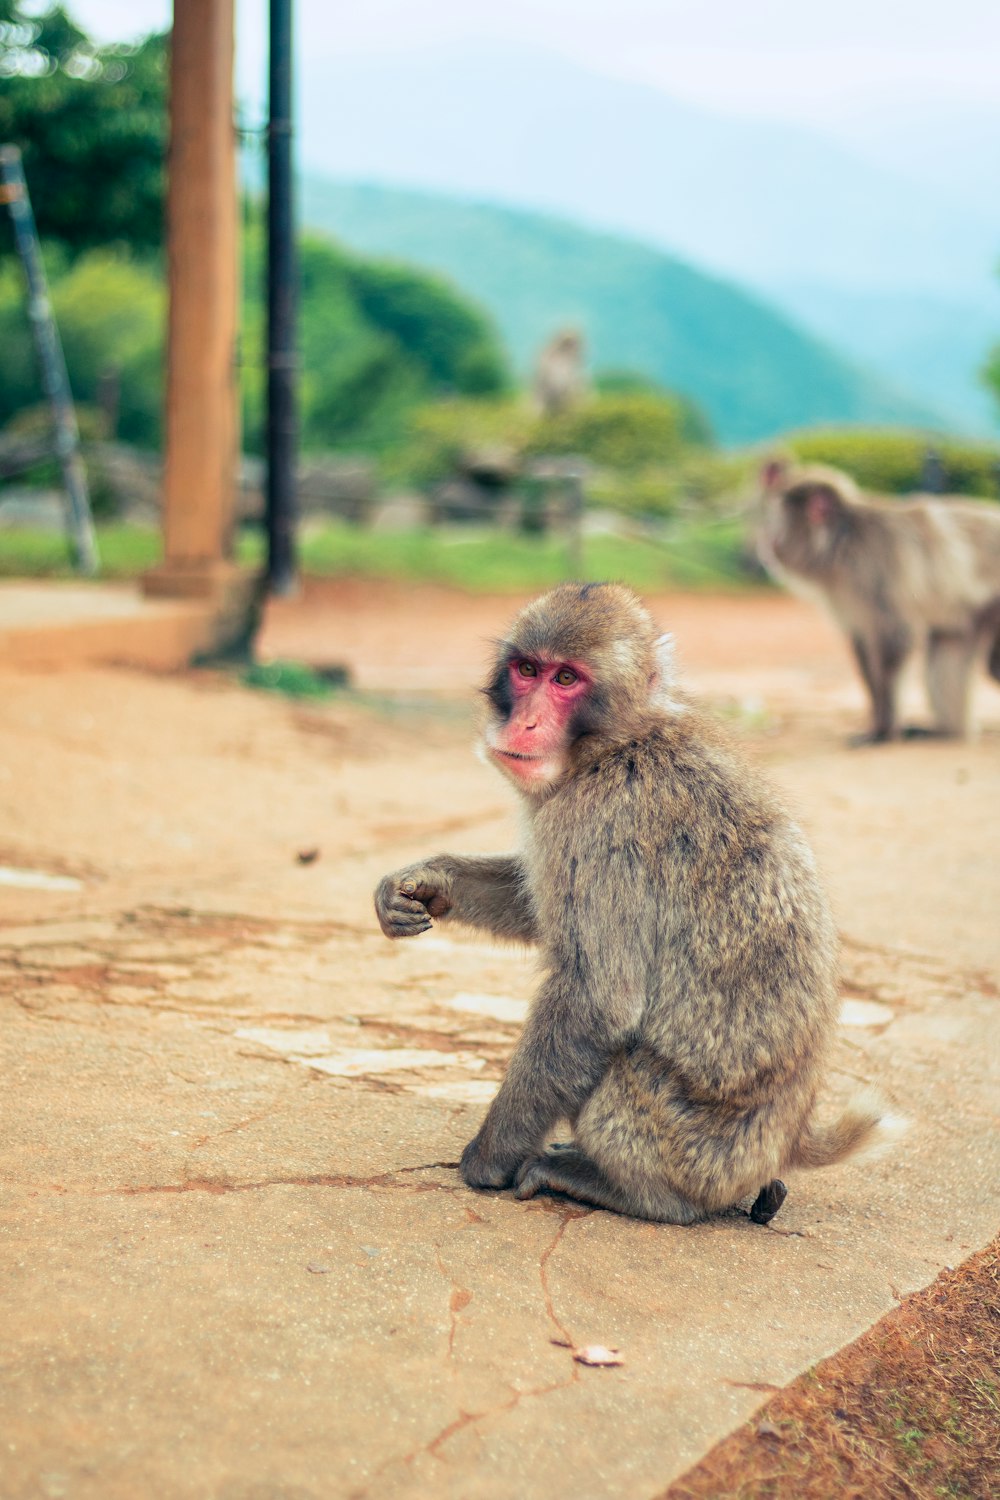 a monkey sitting on the ground next to another monkey